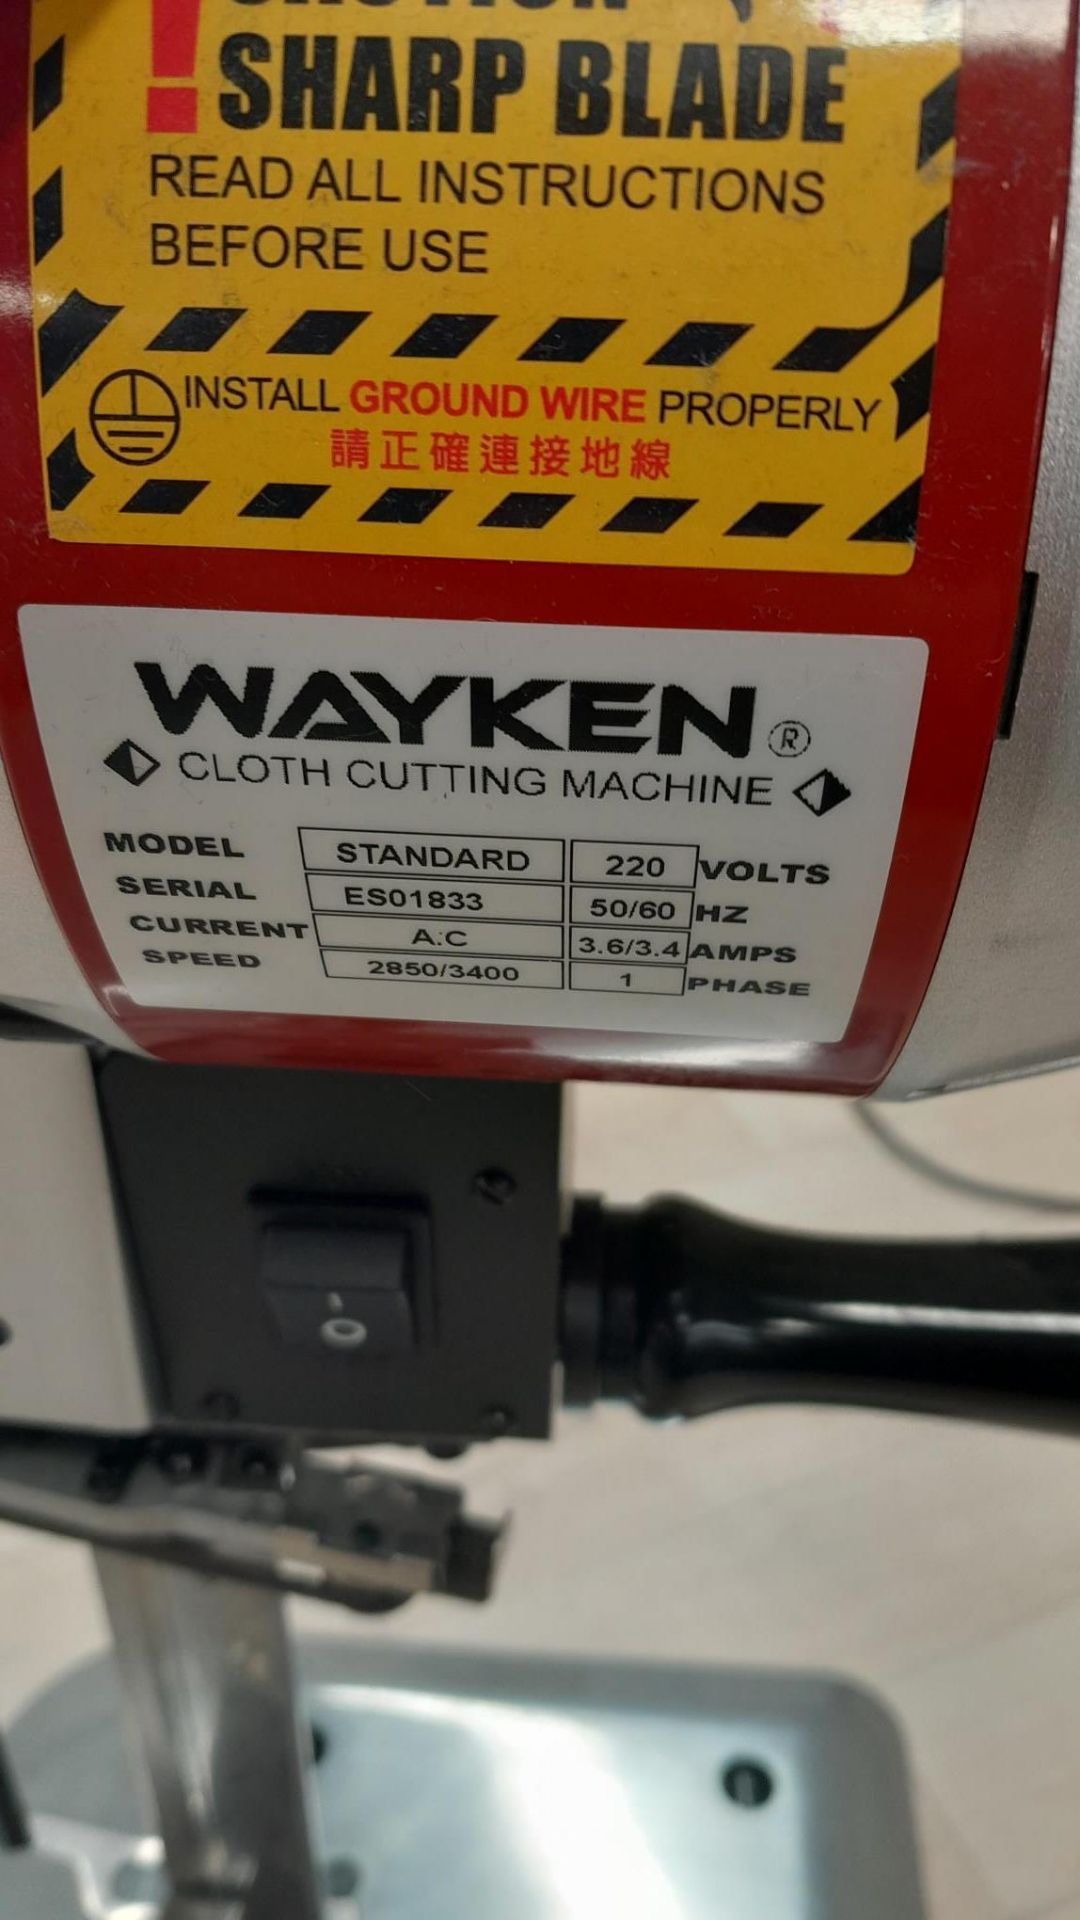 Wayken GKM-629-8 8" Straight Knife Cutting Machine Serial Number S01833, 240v - Image 3 of 3